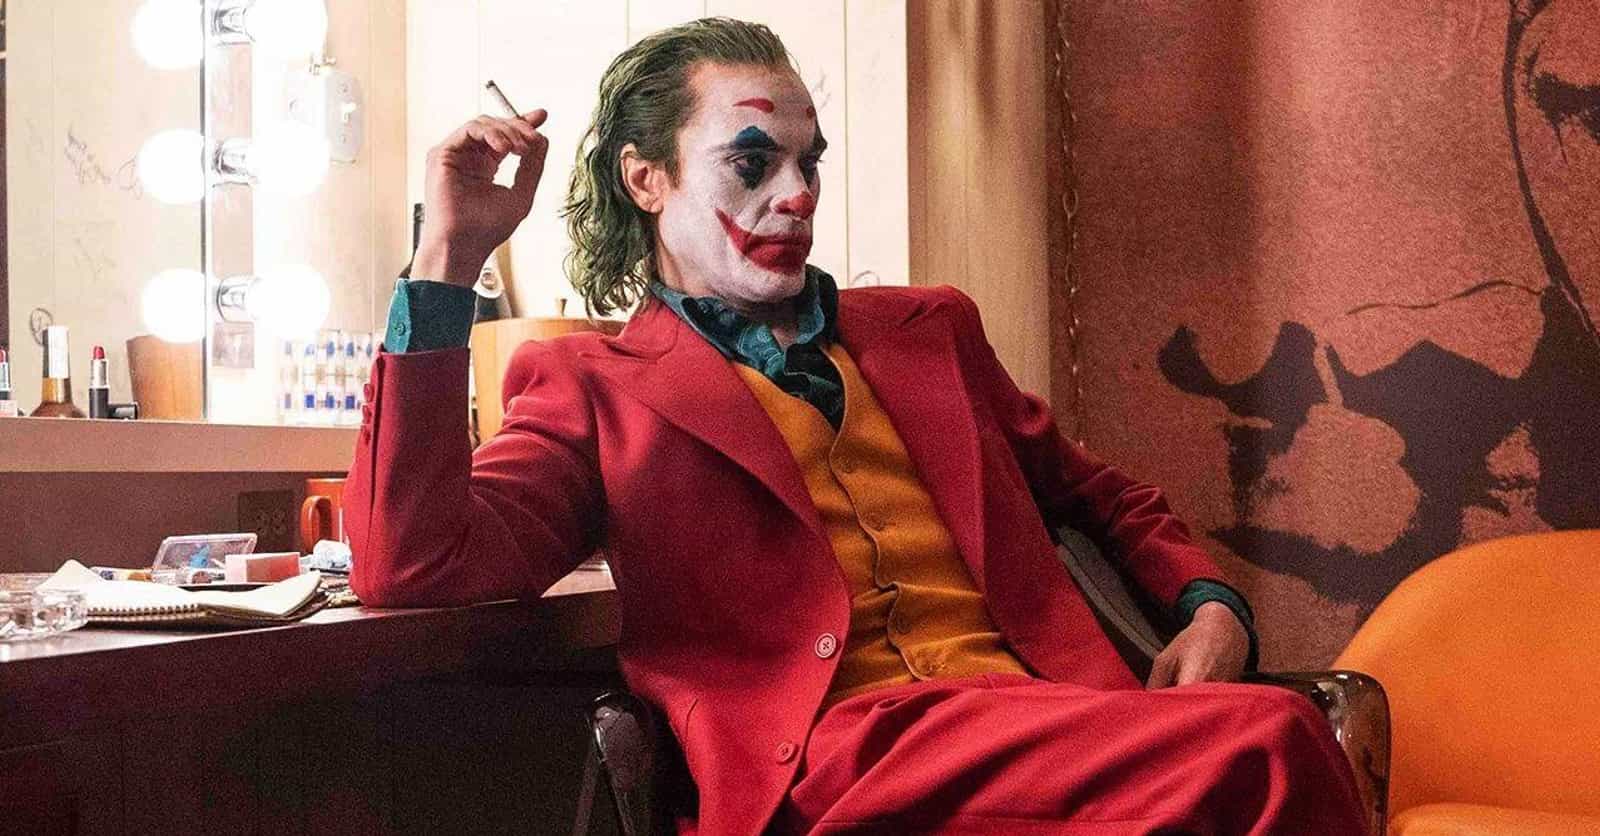 17 Important References In 'Joker' You Might Have Missed